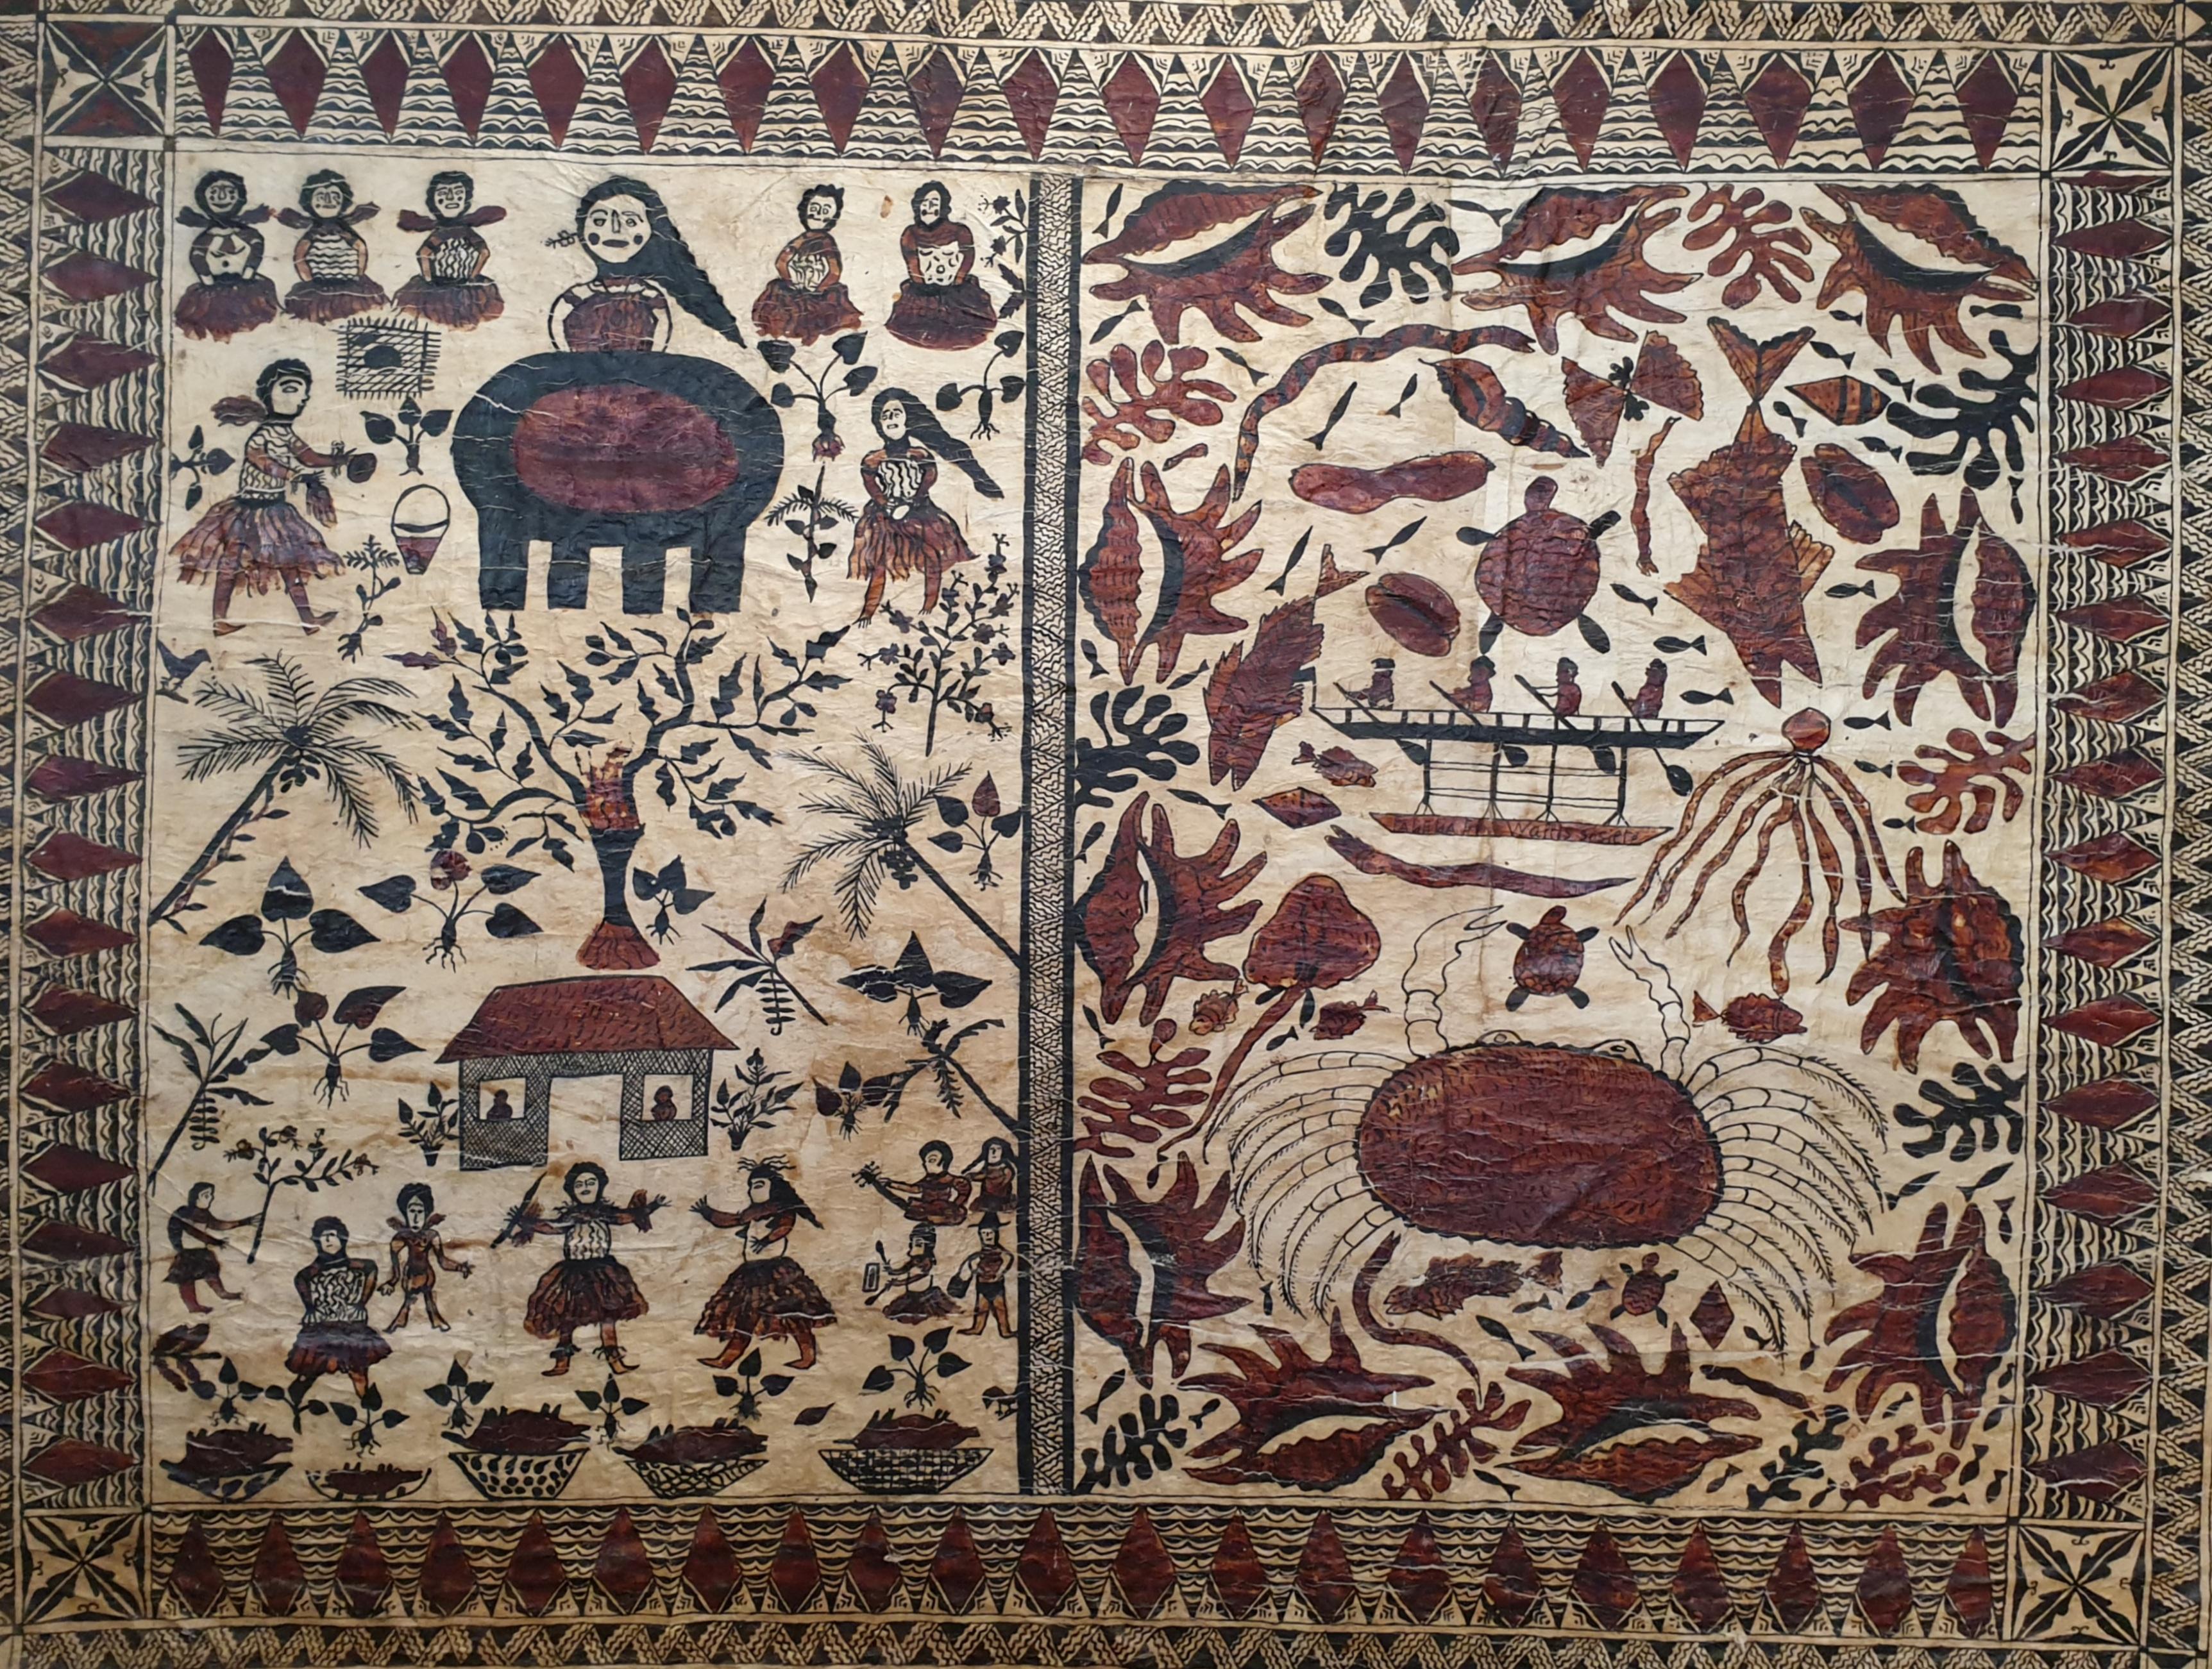 Very large and detailed Ethnographic hand painted early 20th century tapa cloth from the Society Island of Wallis in French Polynesia. Laid on board.

This piece is unusual both for its size and the fact that it is largely hand painted and then